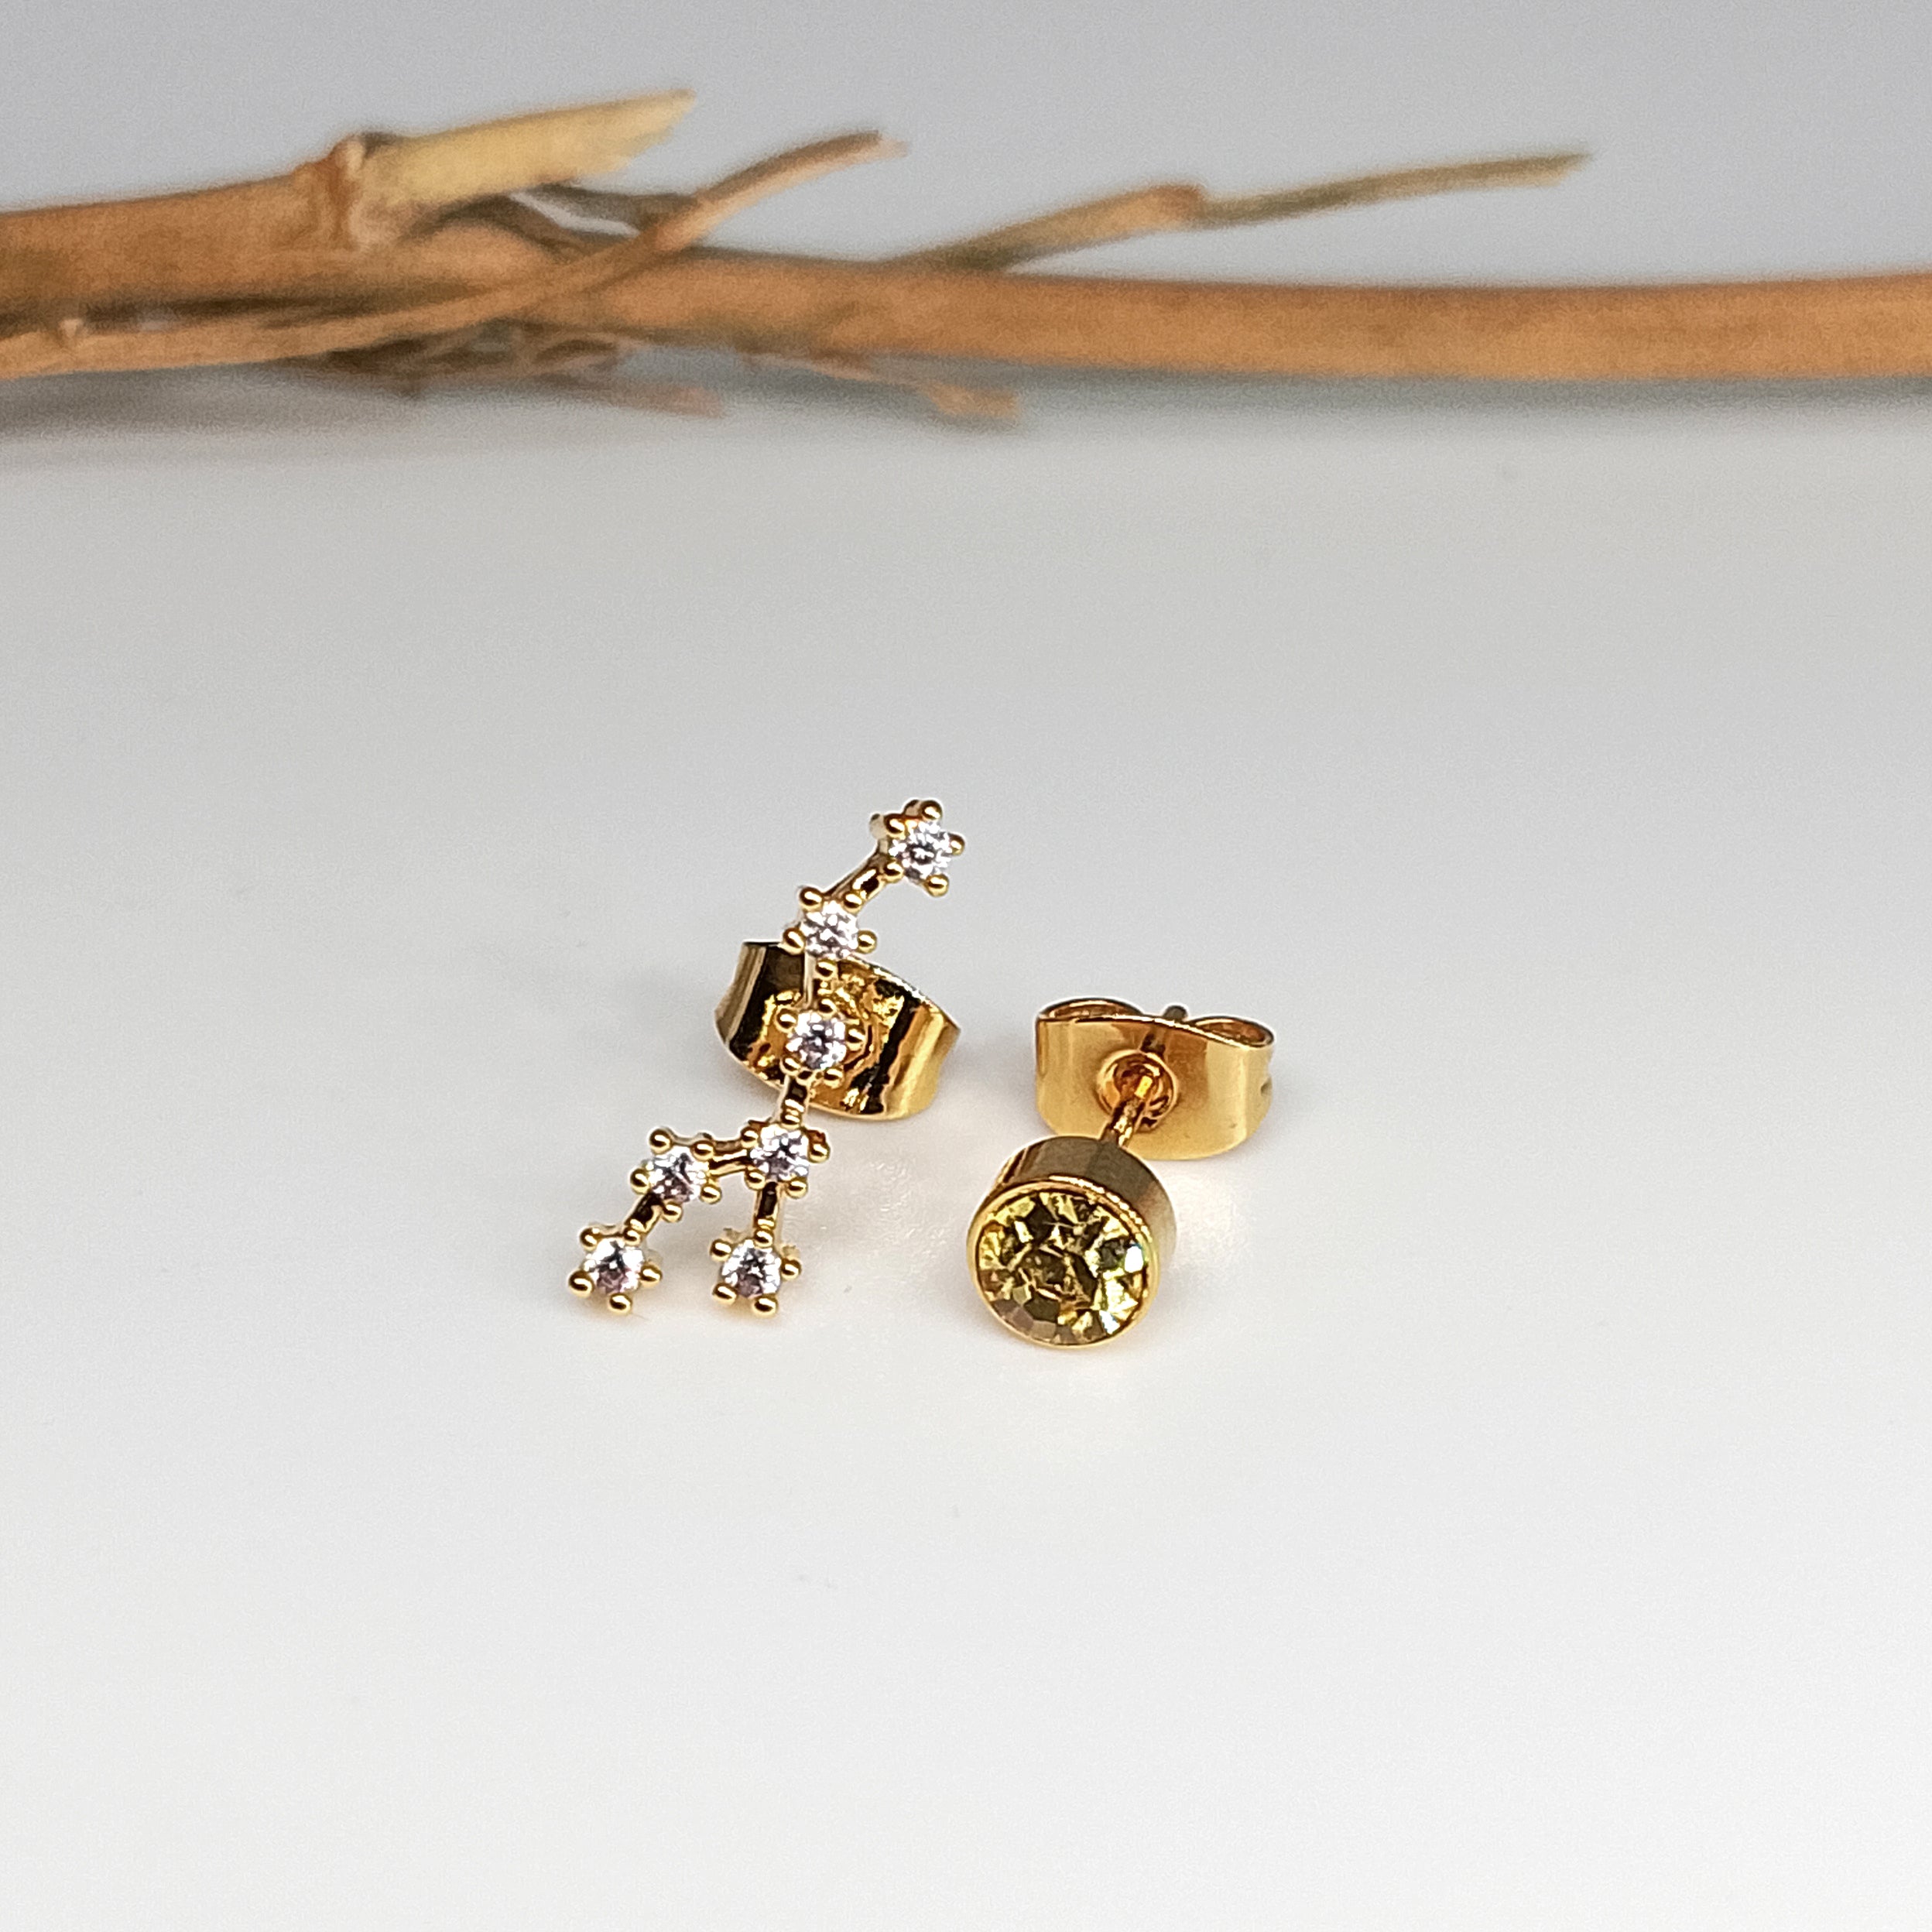 Leo Constellation Earrings - 24K Gold Plated with Amber